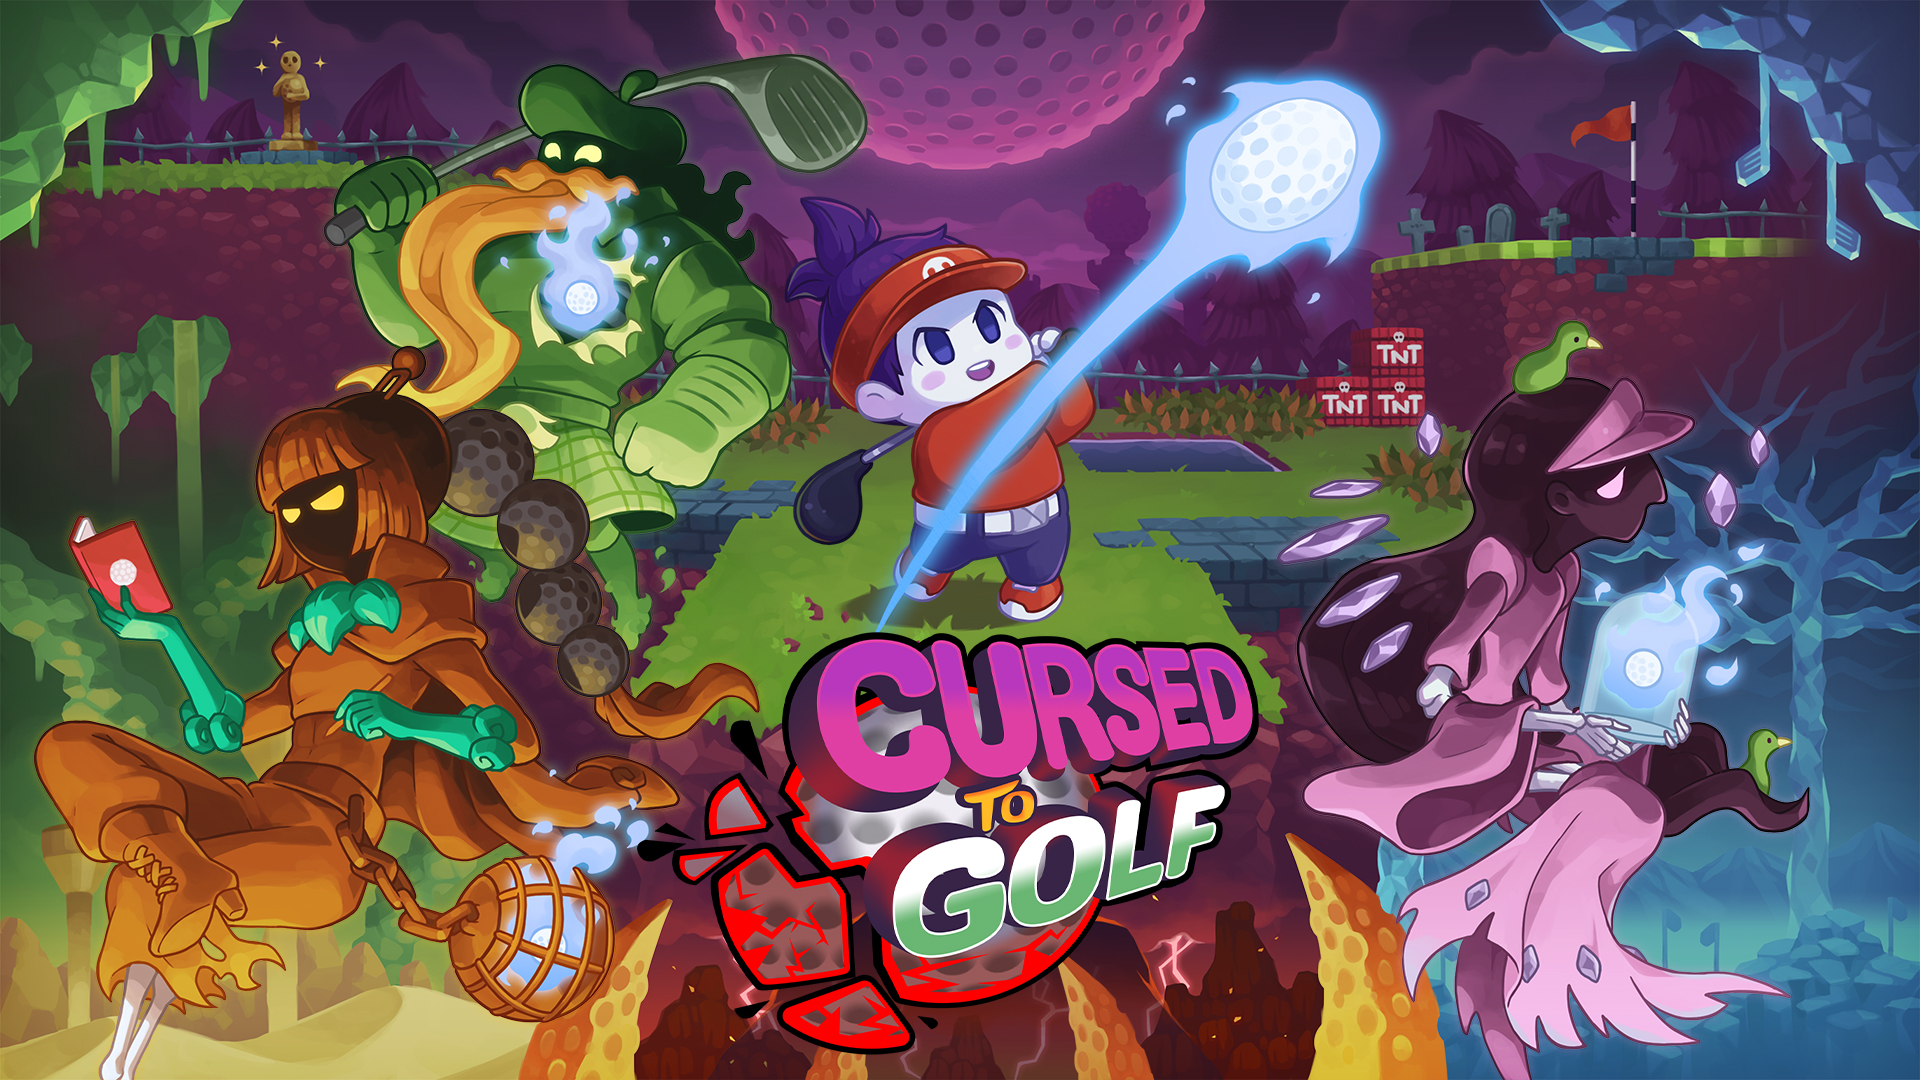 Hands-On Preview: Cursed to Golf